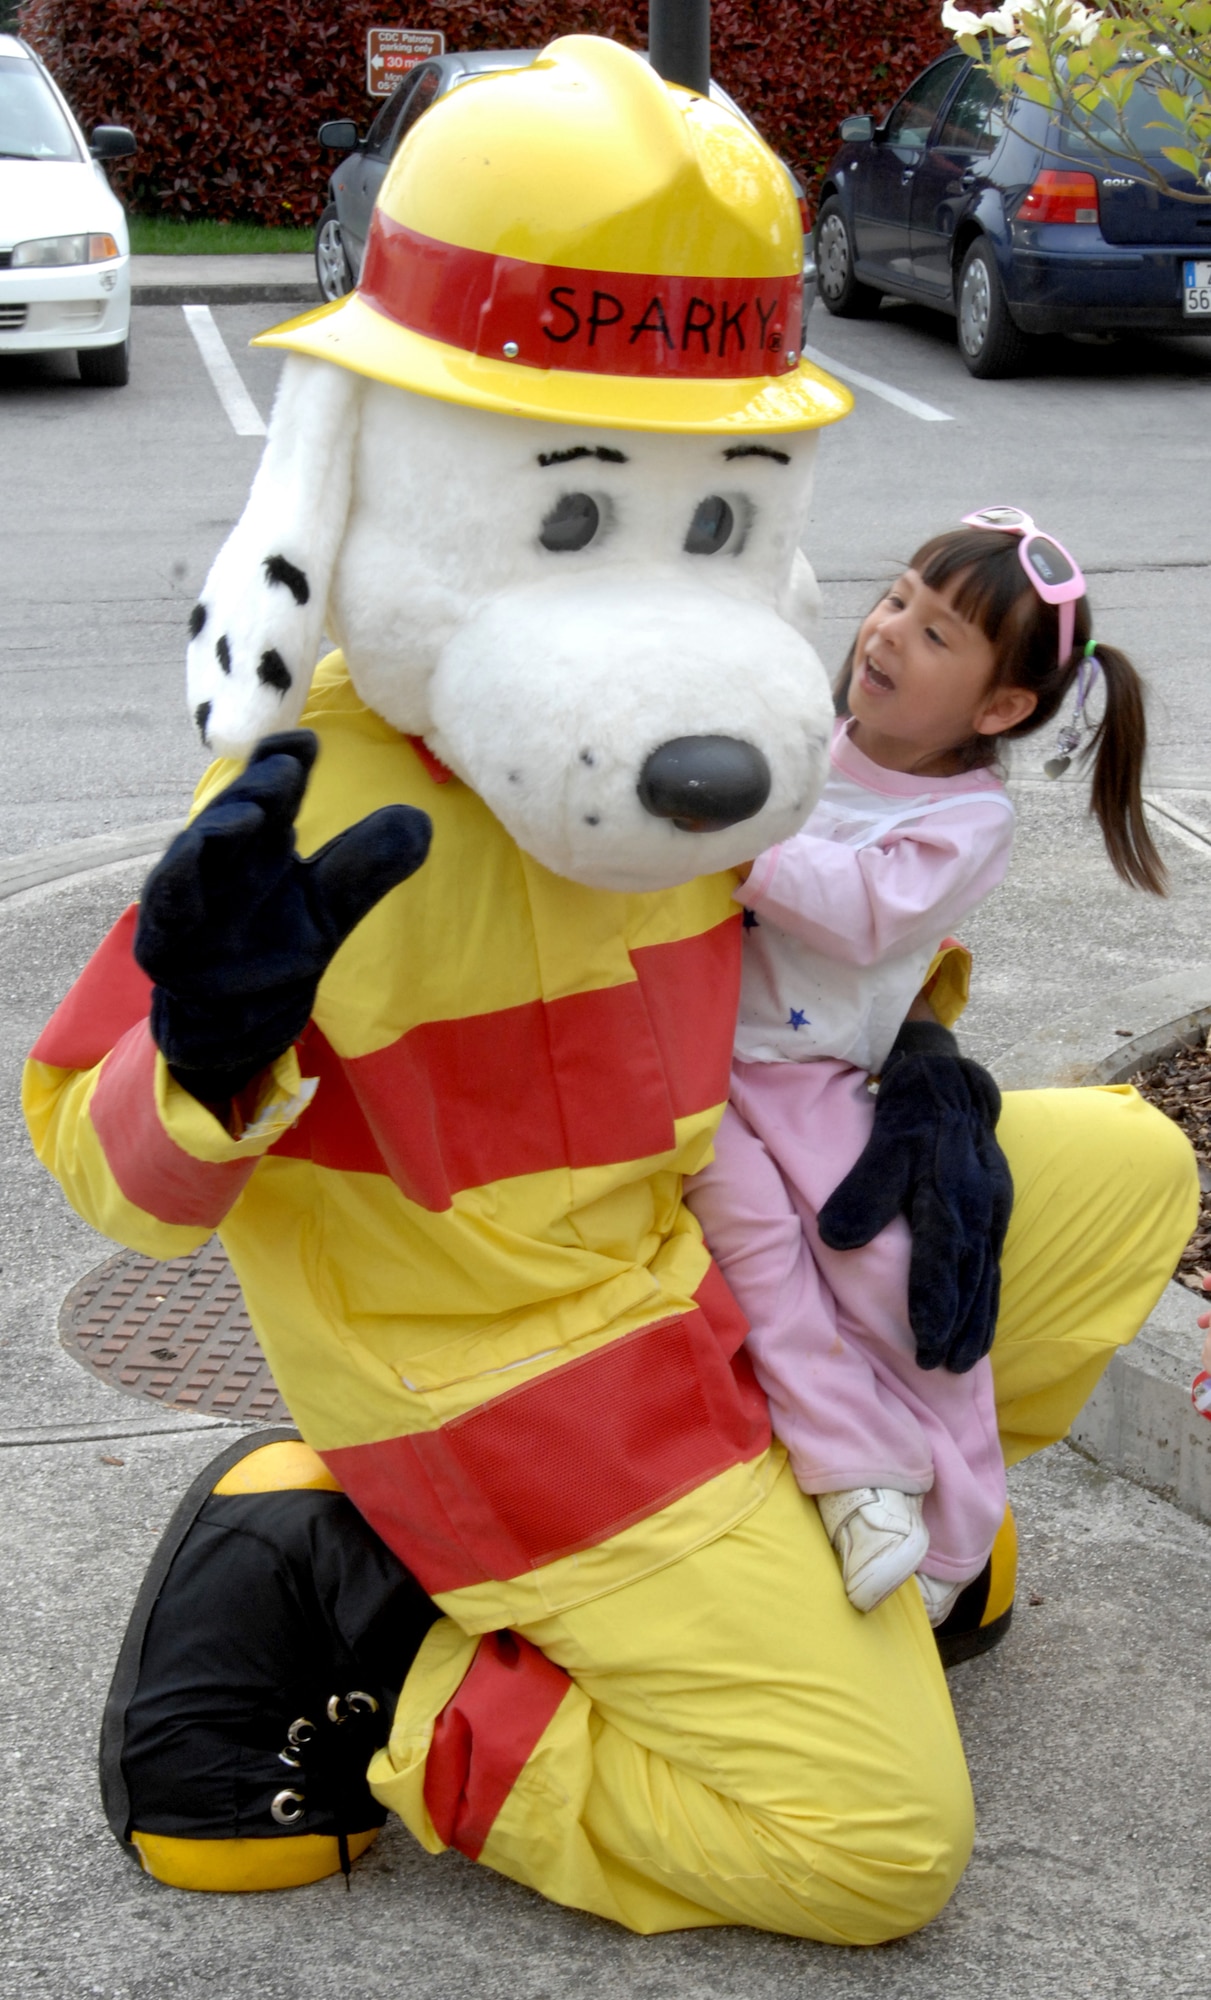 AVIANO AIR BASE, Italy--Lilianna Rodriguez pets Sparky the firefightin' dog during the month of the military CDC parade at Area 1. A firetruck, Sparky the dog, and 31st Security Forces personnel helped escort the children during the parade. (U.S. Air Force photo/Airman 1st Class Tabitha Mans).